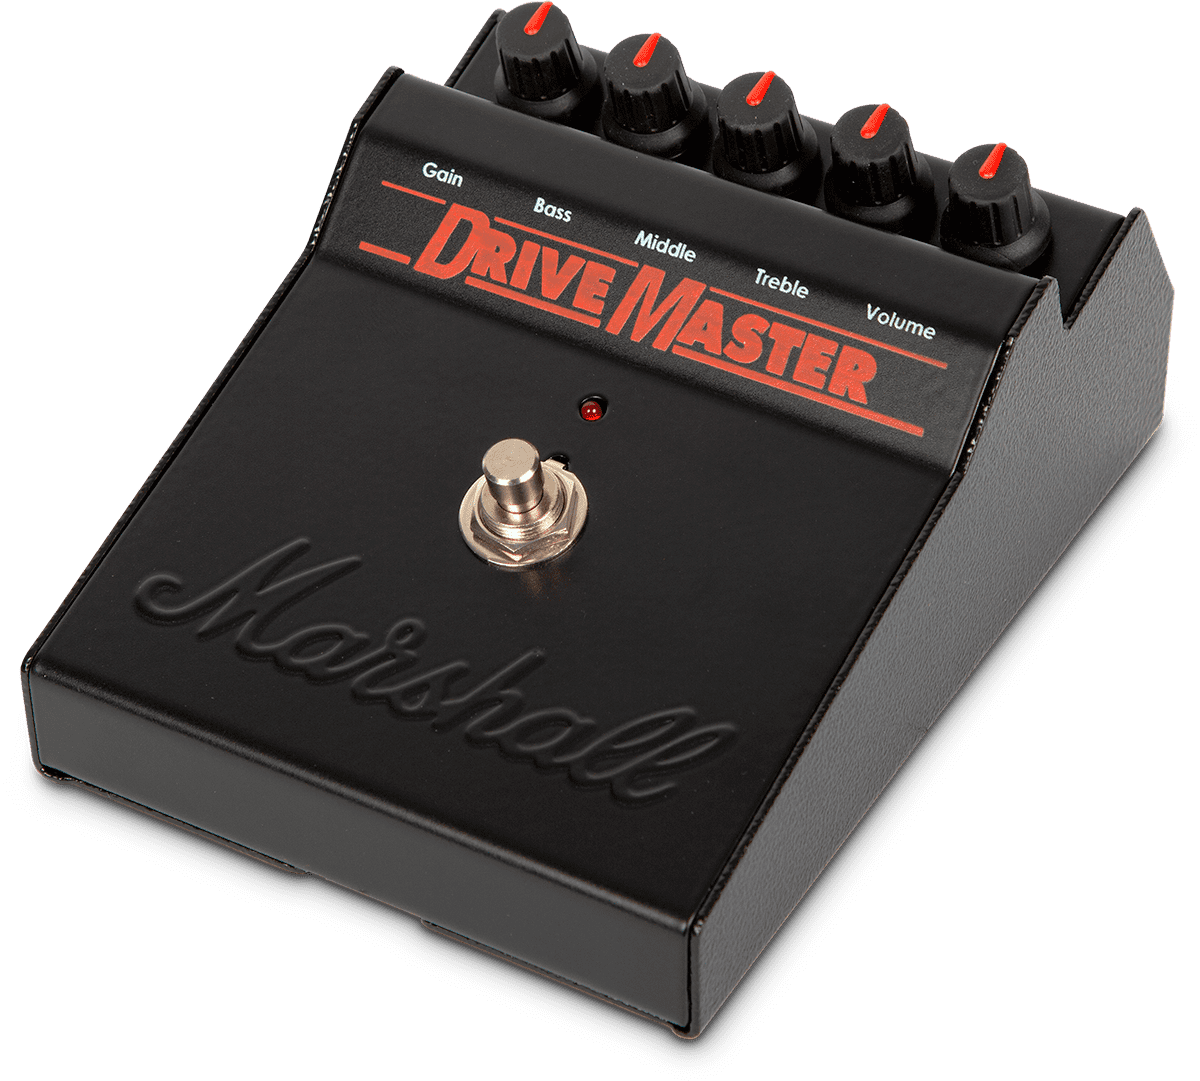 Marshall Drivemaster 60th Anniversary - Overdrive, distortion & fuzz effect pedal - Variation 3